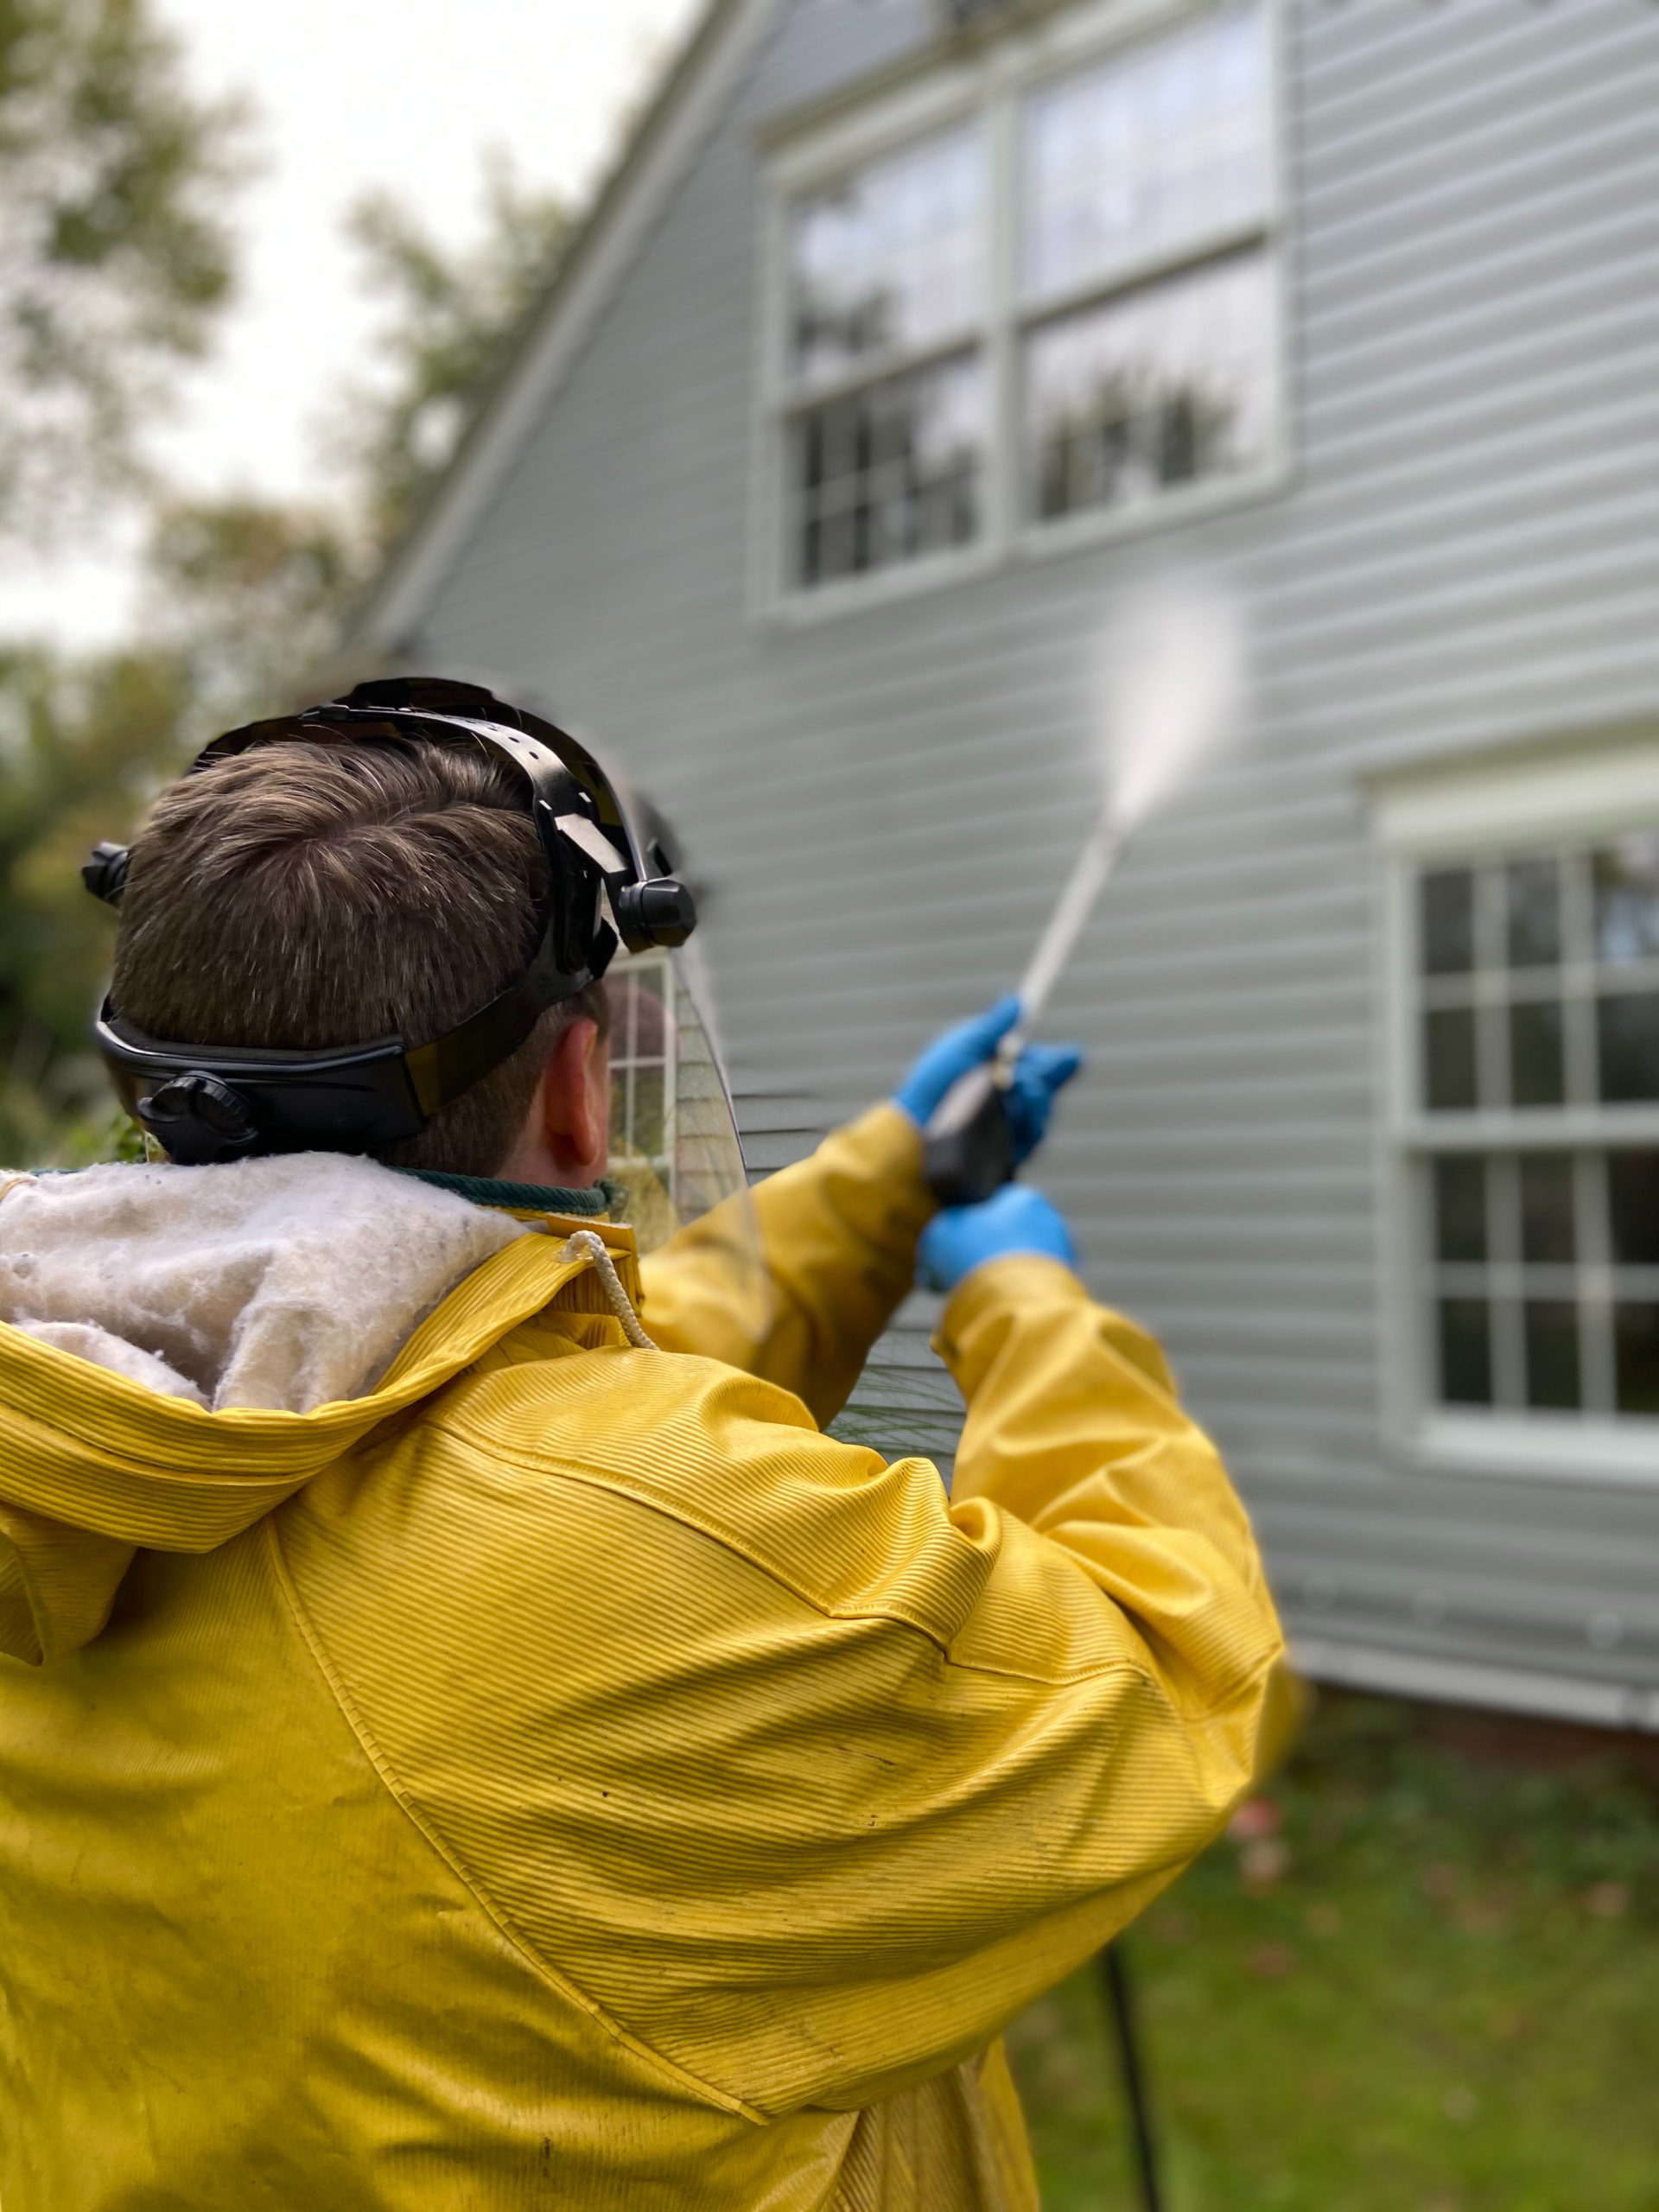 Man in yellow rain jacket pressure washing the exterior of a house